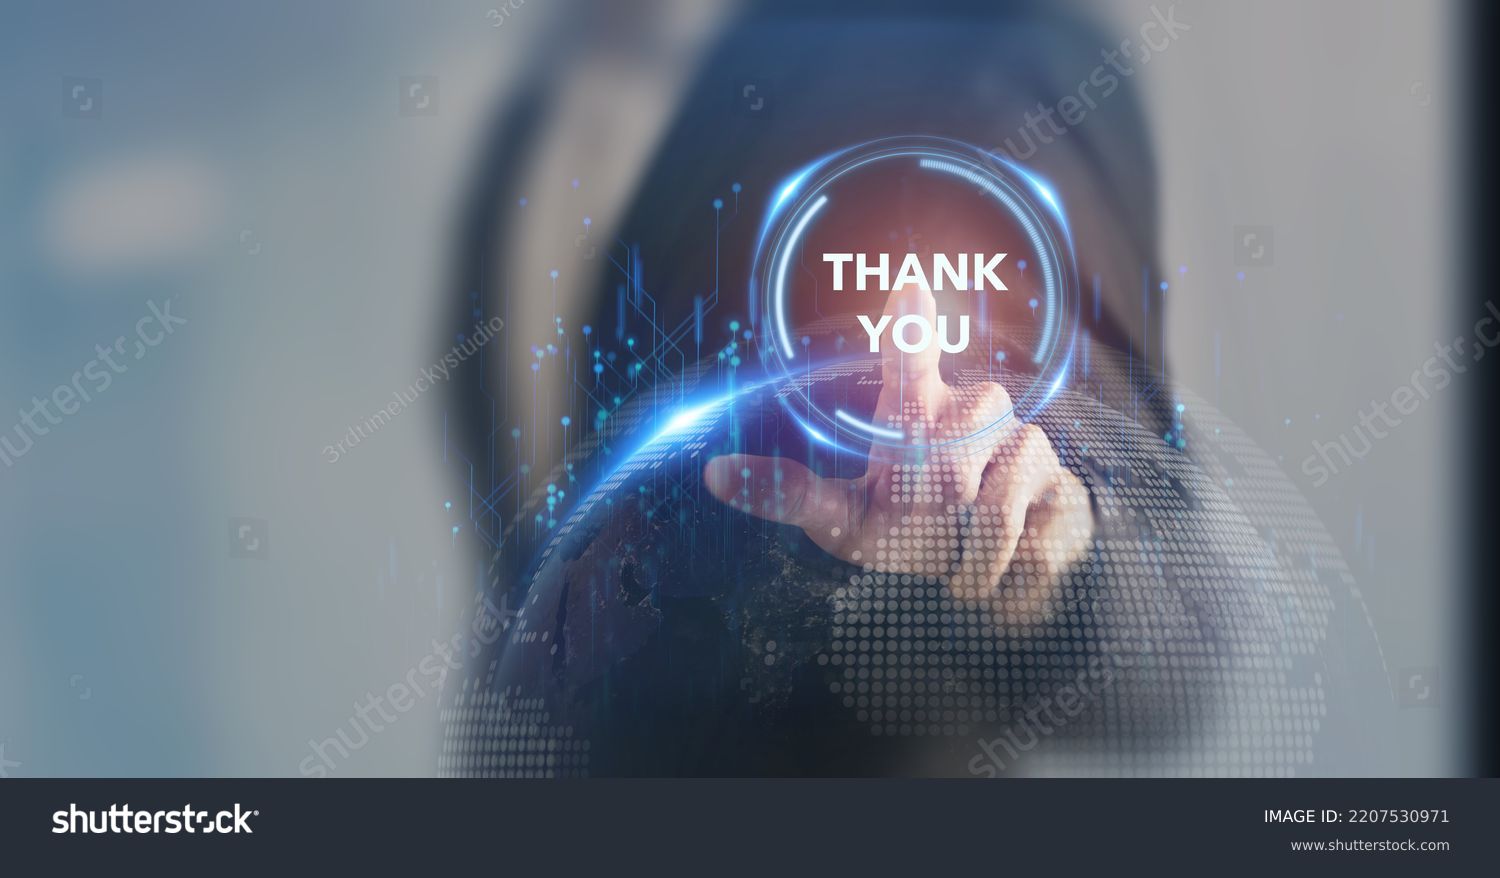 Thank you message for presentation, business, technology, innovation concept.  Businessman touching screen with THANK YOU text on smart background expressing gratitude, acknowledgment and appreciation Arkistovalokuva